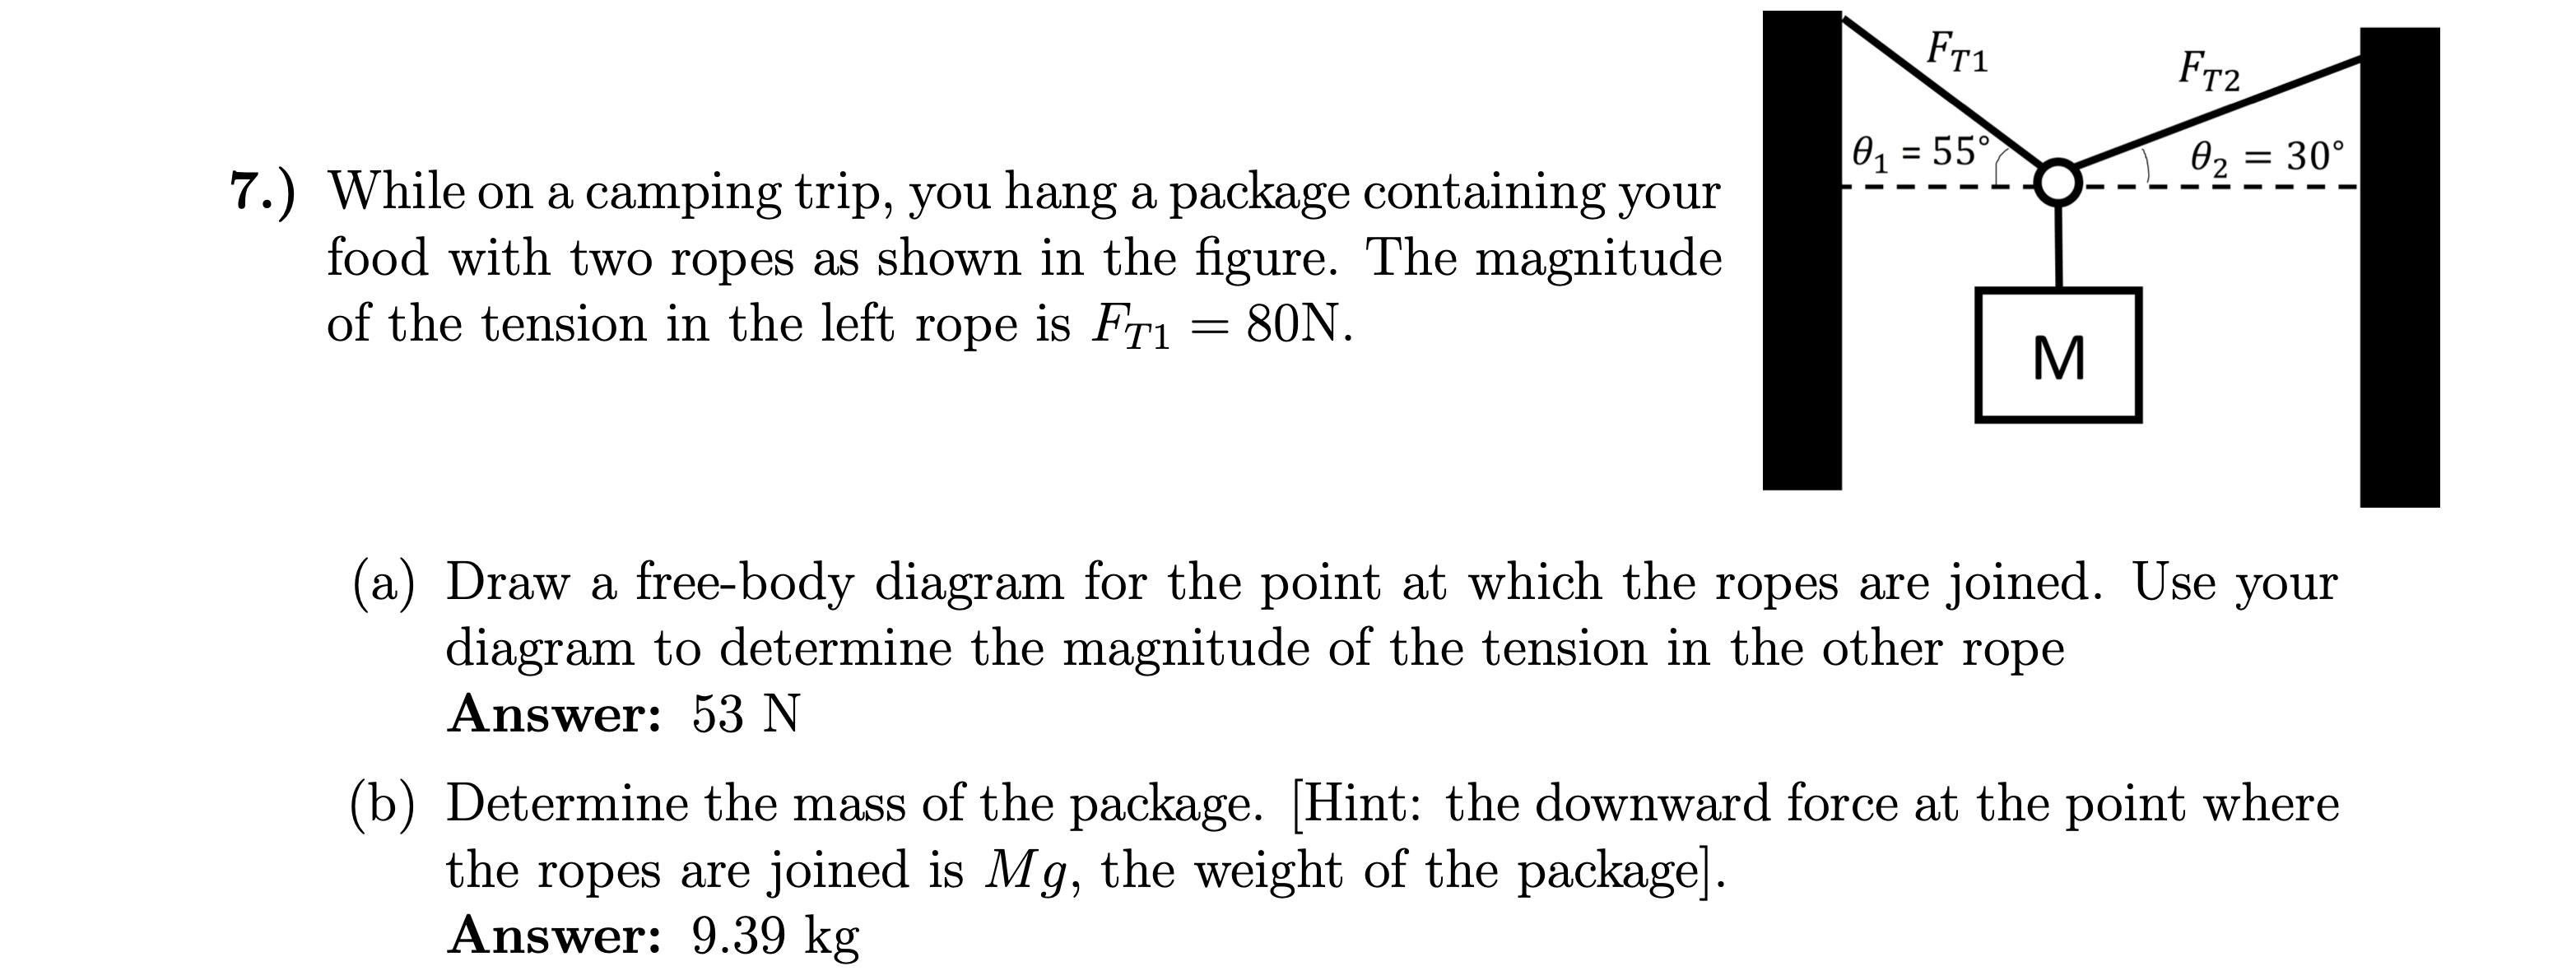 Solved 7.) While on a camping trip, you hang a package